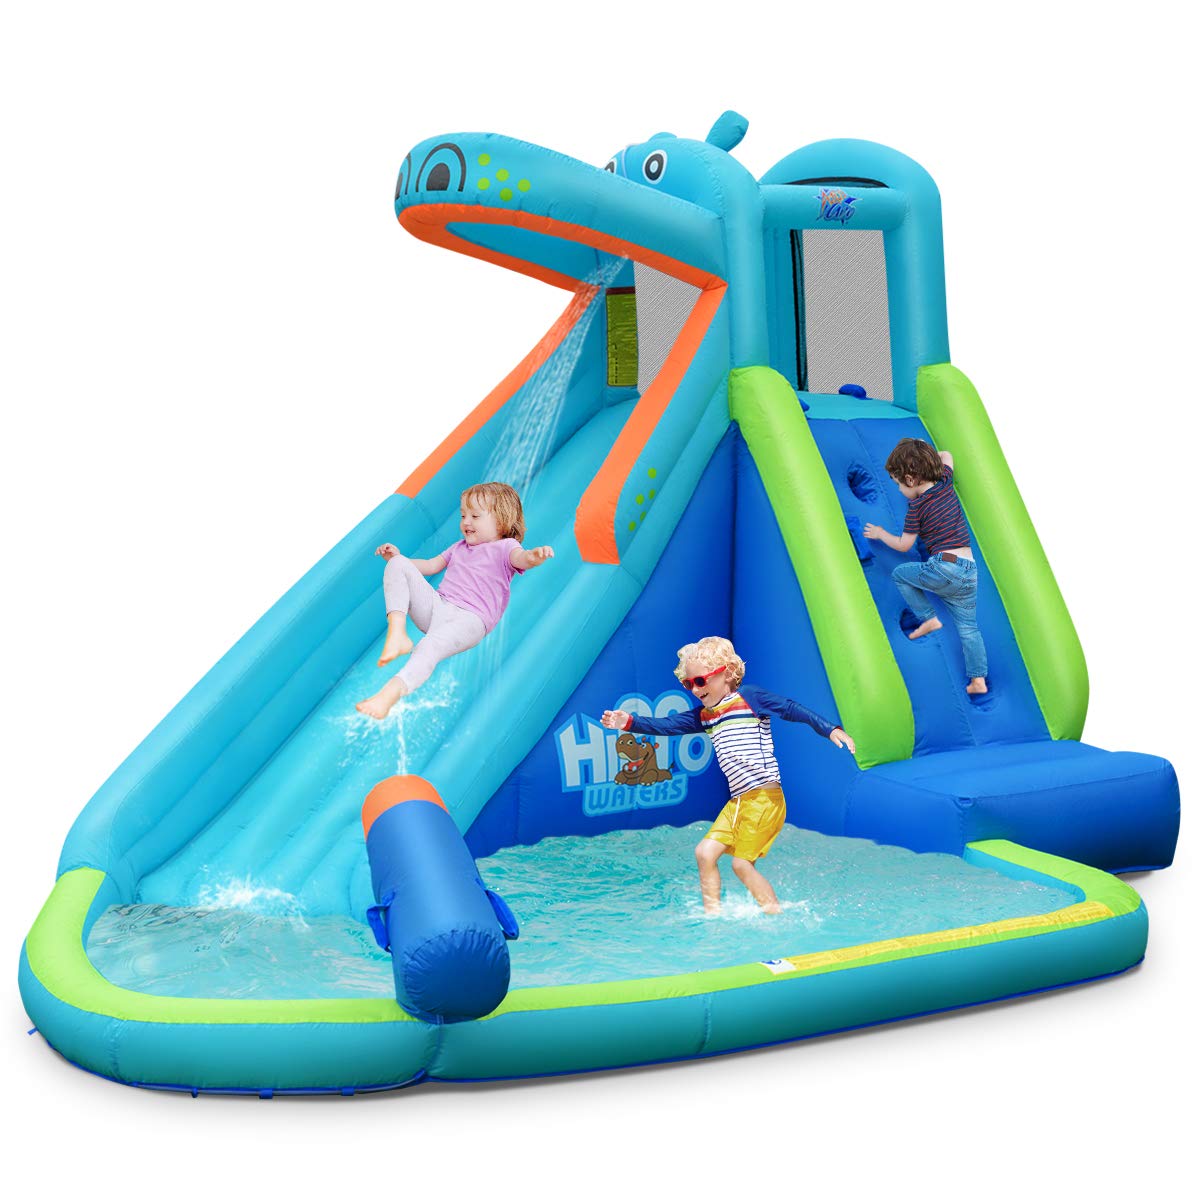 BOUNTECH Inflatable Water Slide, Hippo Themed Waterslide Park for Kids Backyard Outdoor Fun w/Long Slide, Splashing Pool, Blow up Water Slides Inflatables for Kids and Adults Party Gifts Hippo without Blower